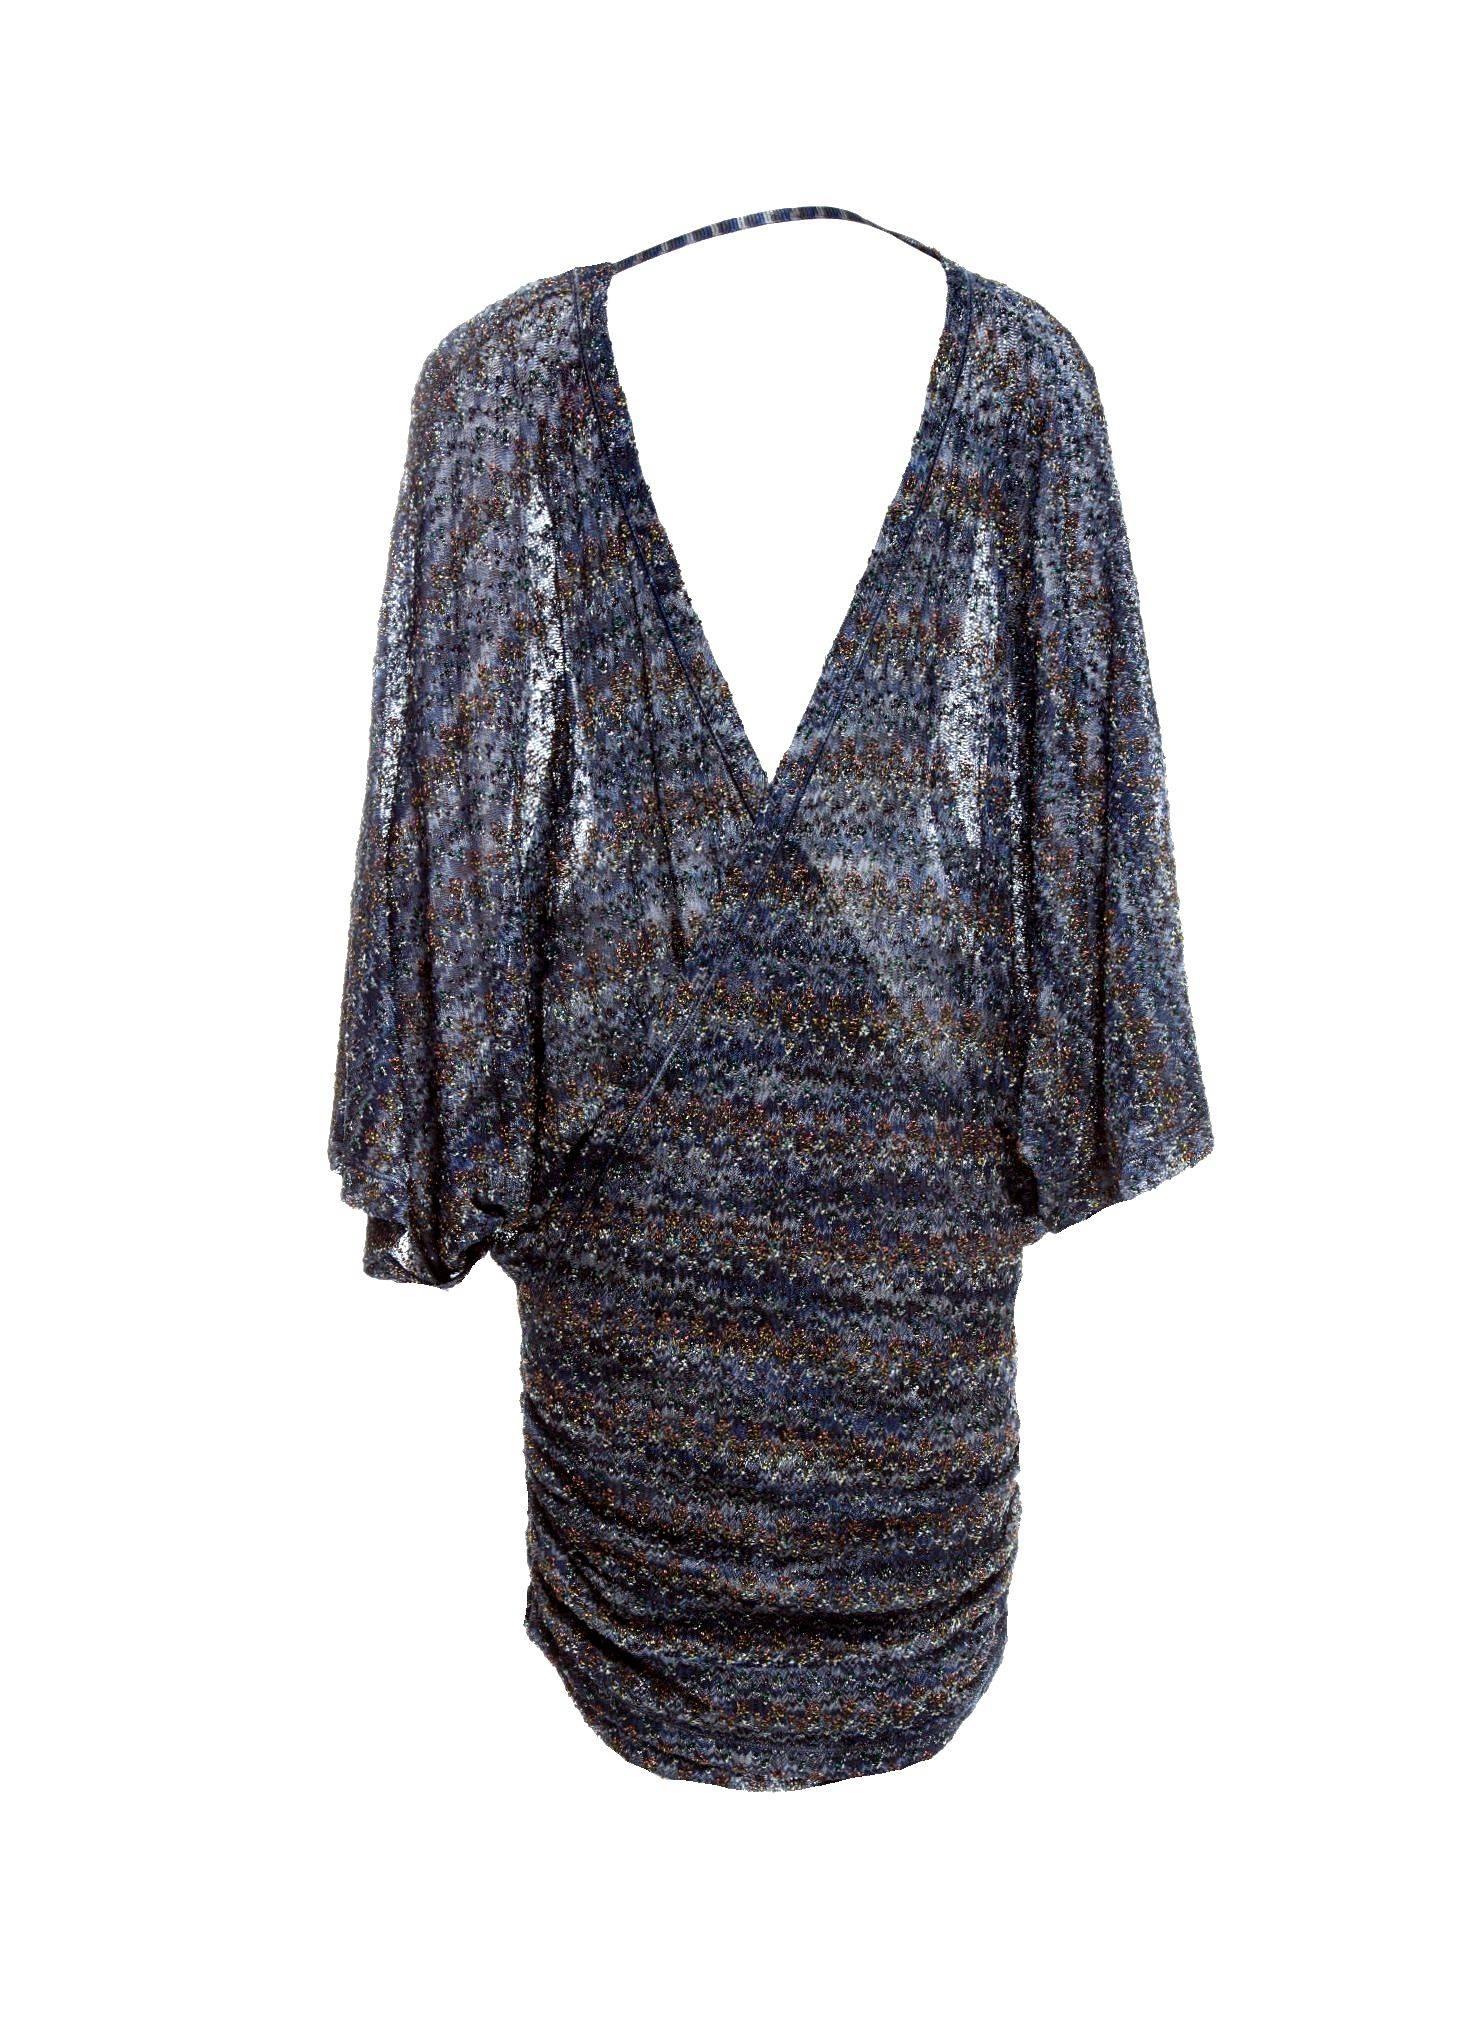 Beautiful multicolored midnight blue lurex MISSONI kaftan dress
Classic MISSONI signature knit
Simply slips on
Wrap style
V-Neck
Batwing sleeves
Crochet-knit details - so beautiful!
Dry Clean only
Made in Italy
